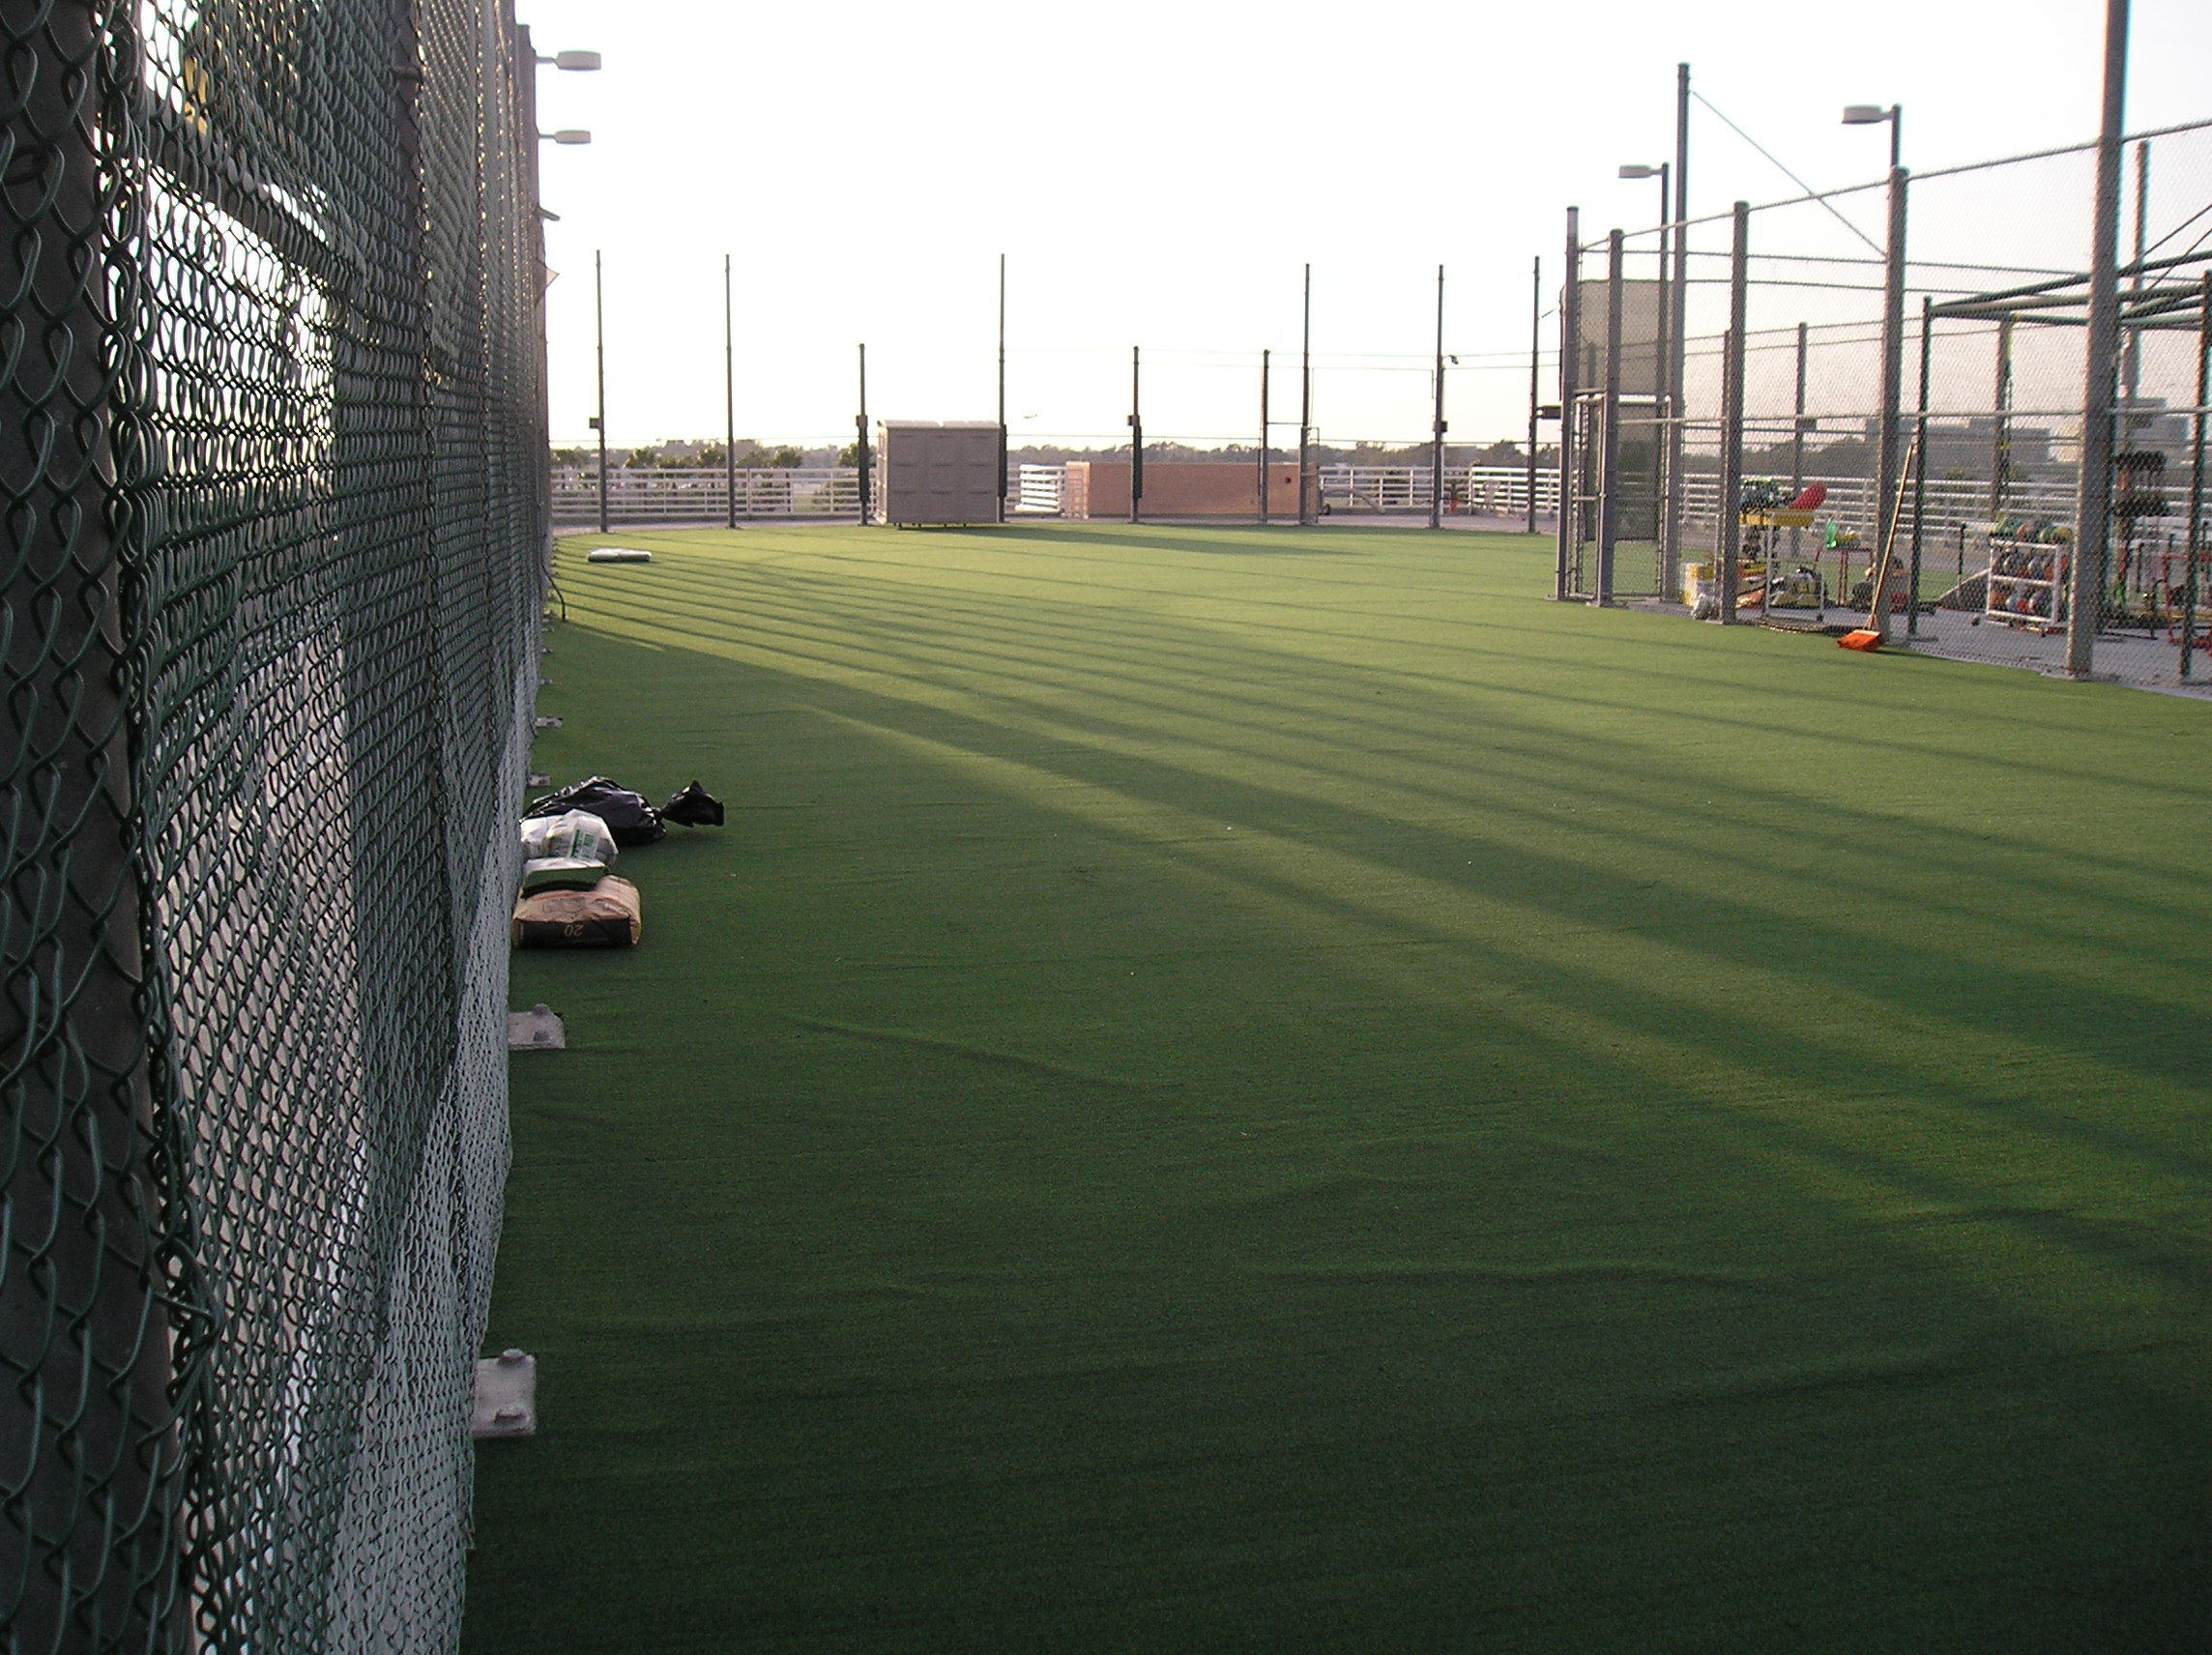 Trainers Turf-63 artificial grass installation,installing artificial grass,artificial turf installation,how to install artificial turf,turf installation